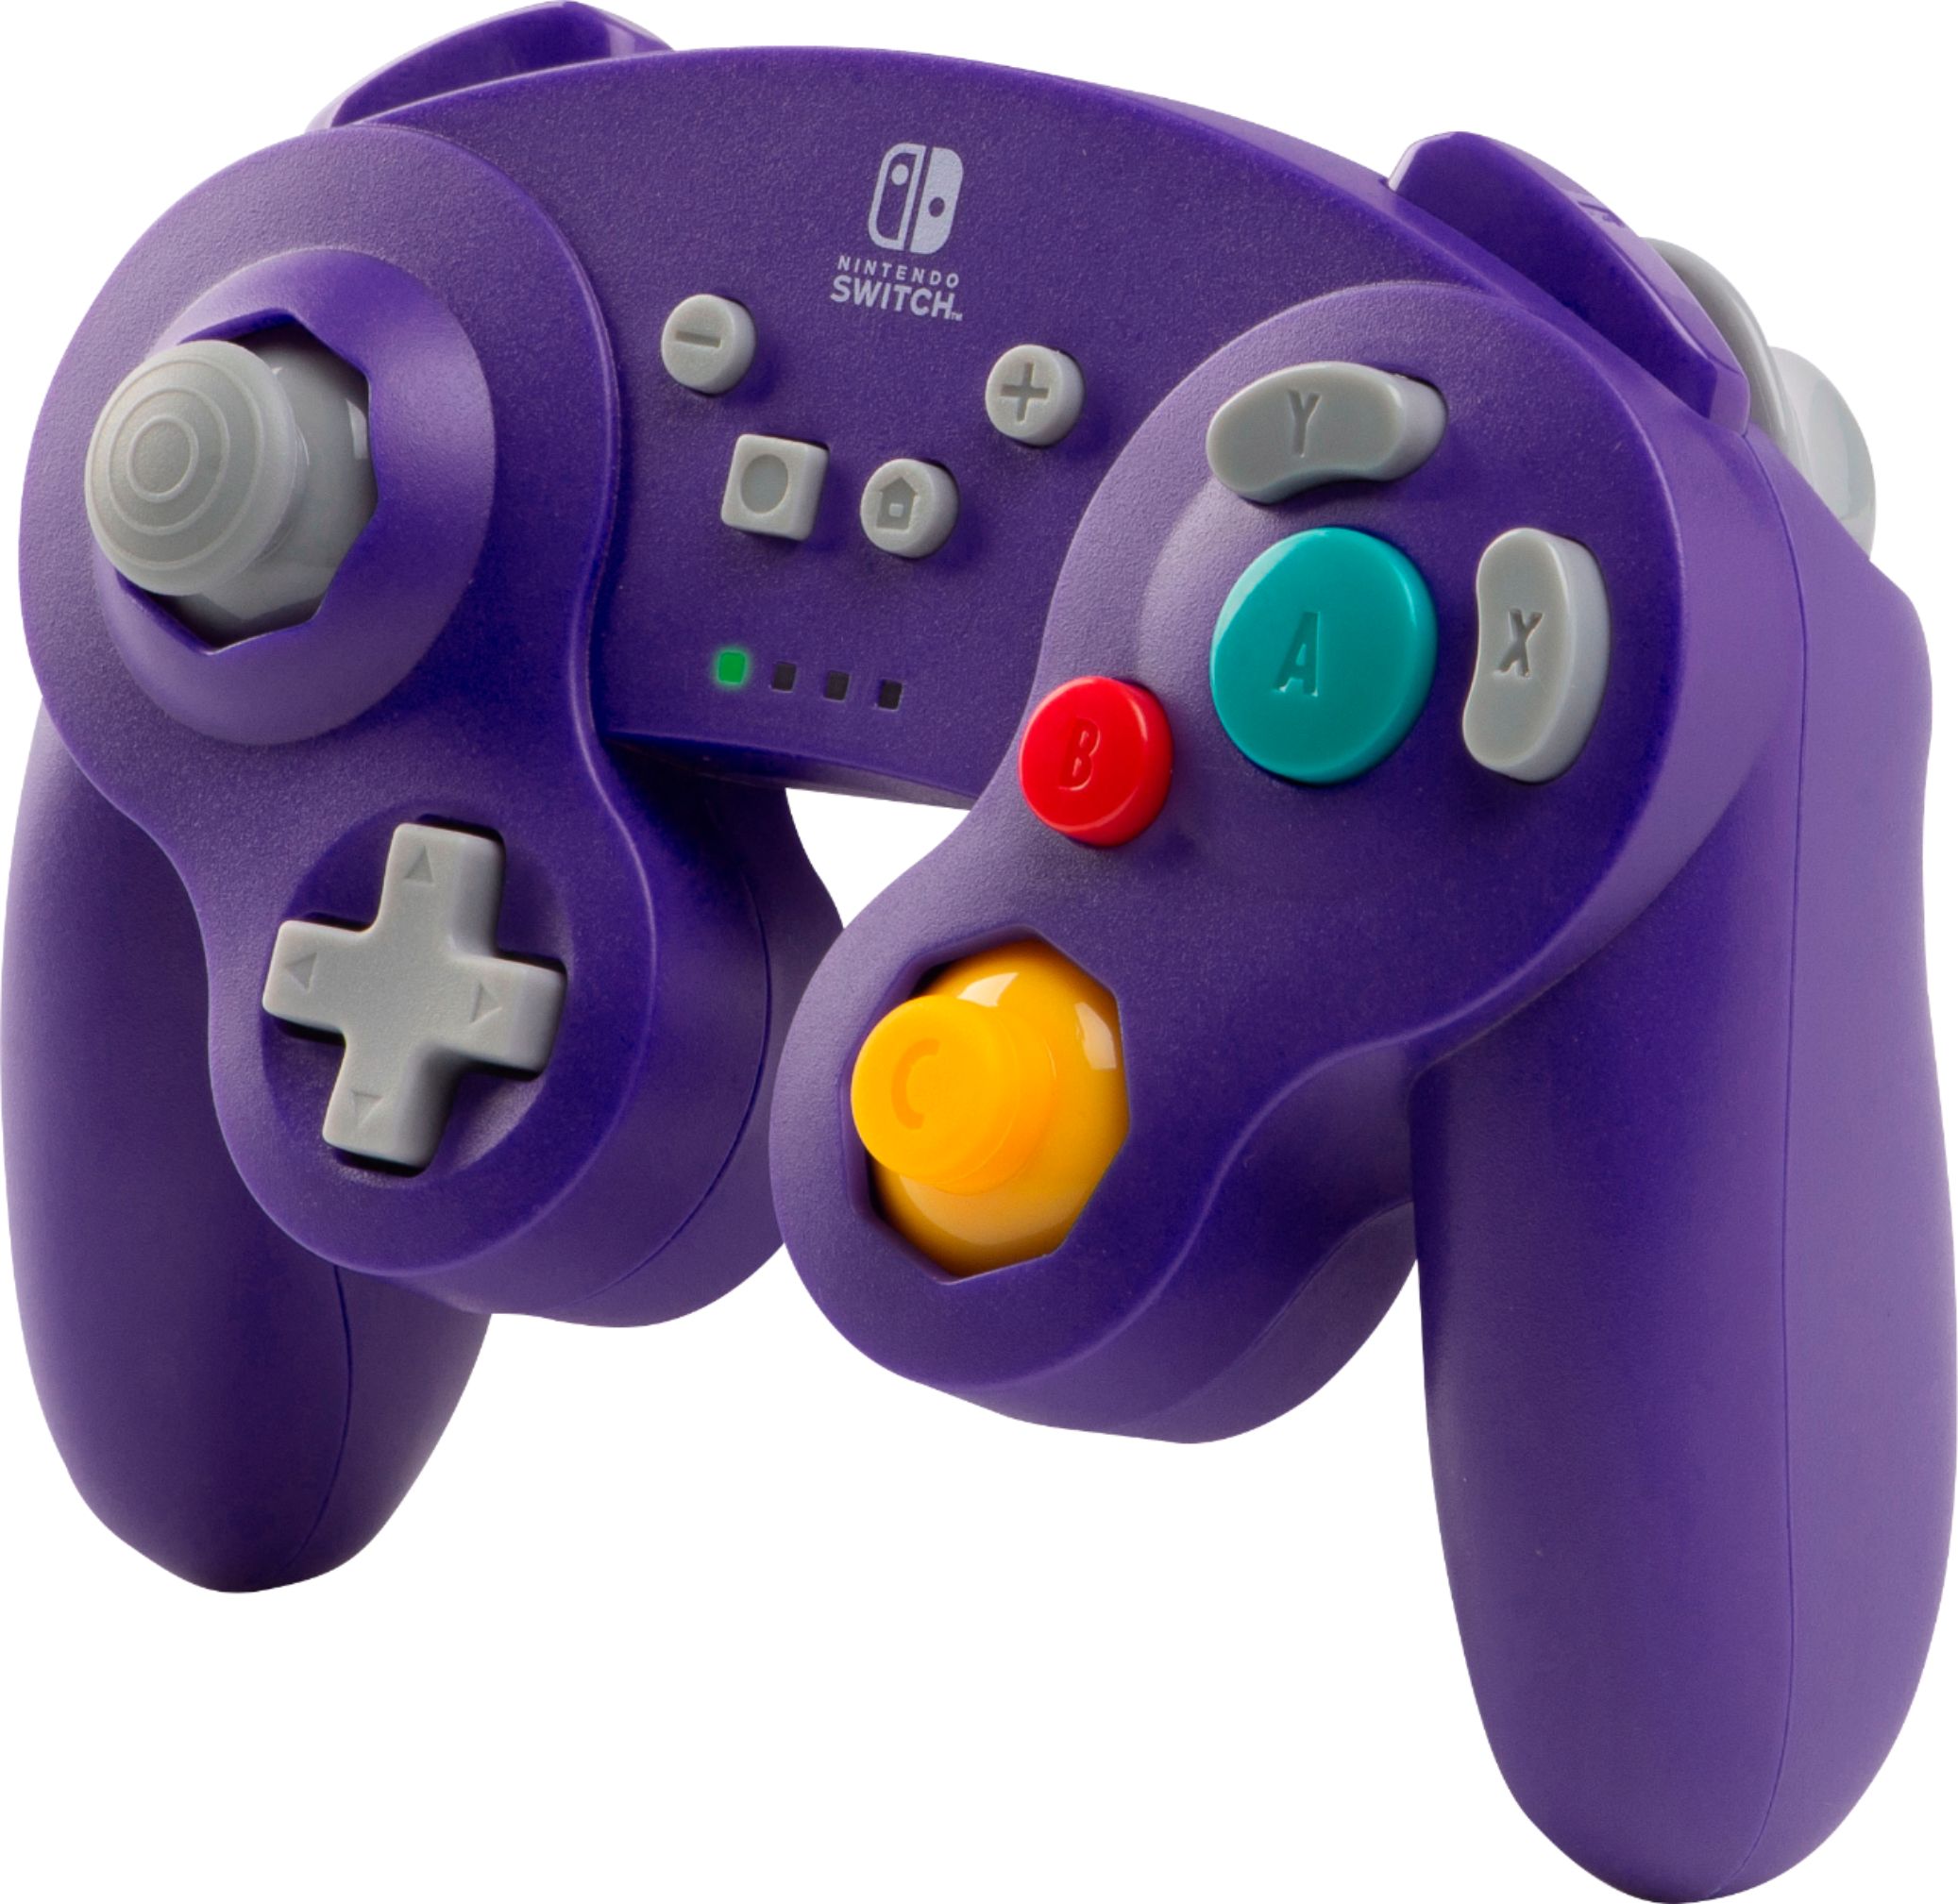 gamecube controller for switch